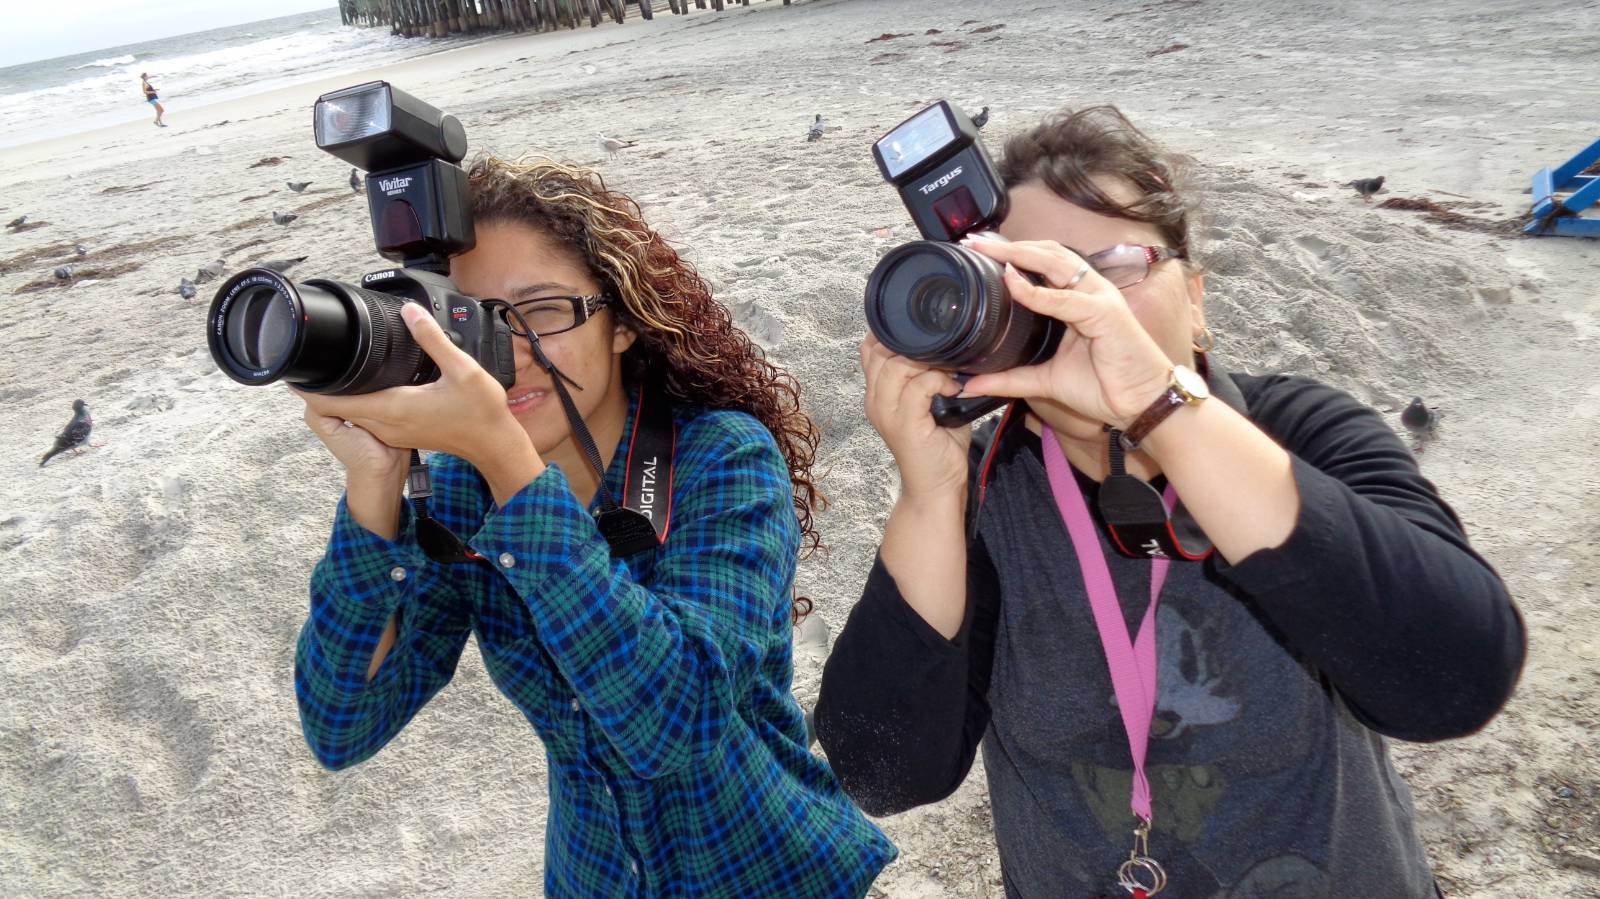 Students taking photographs outside at the beach